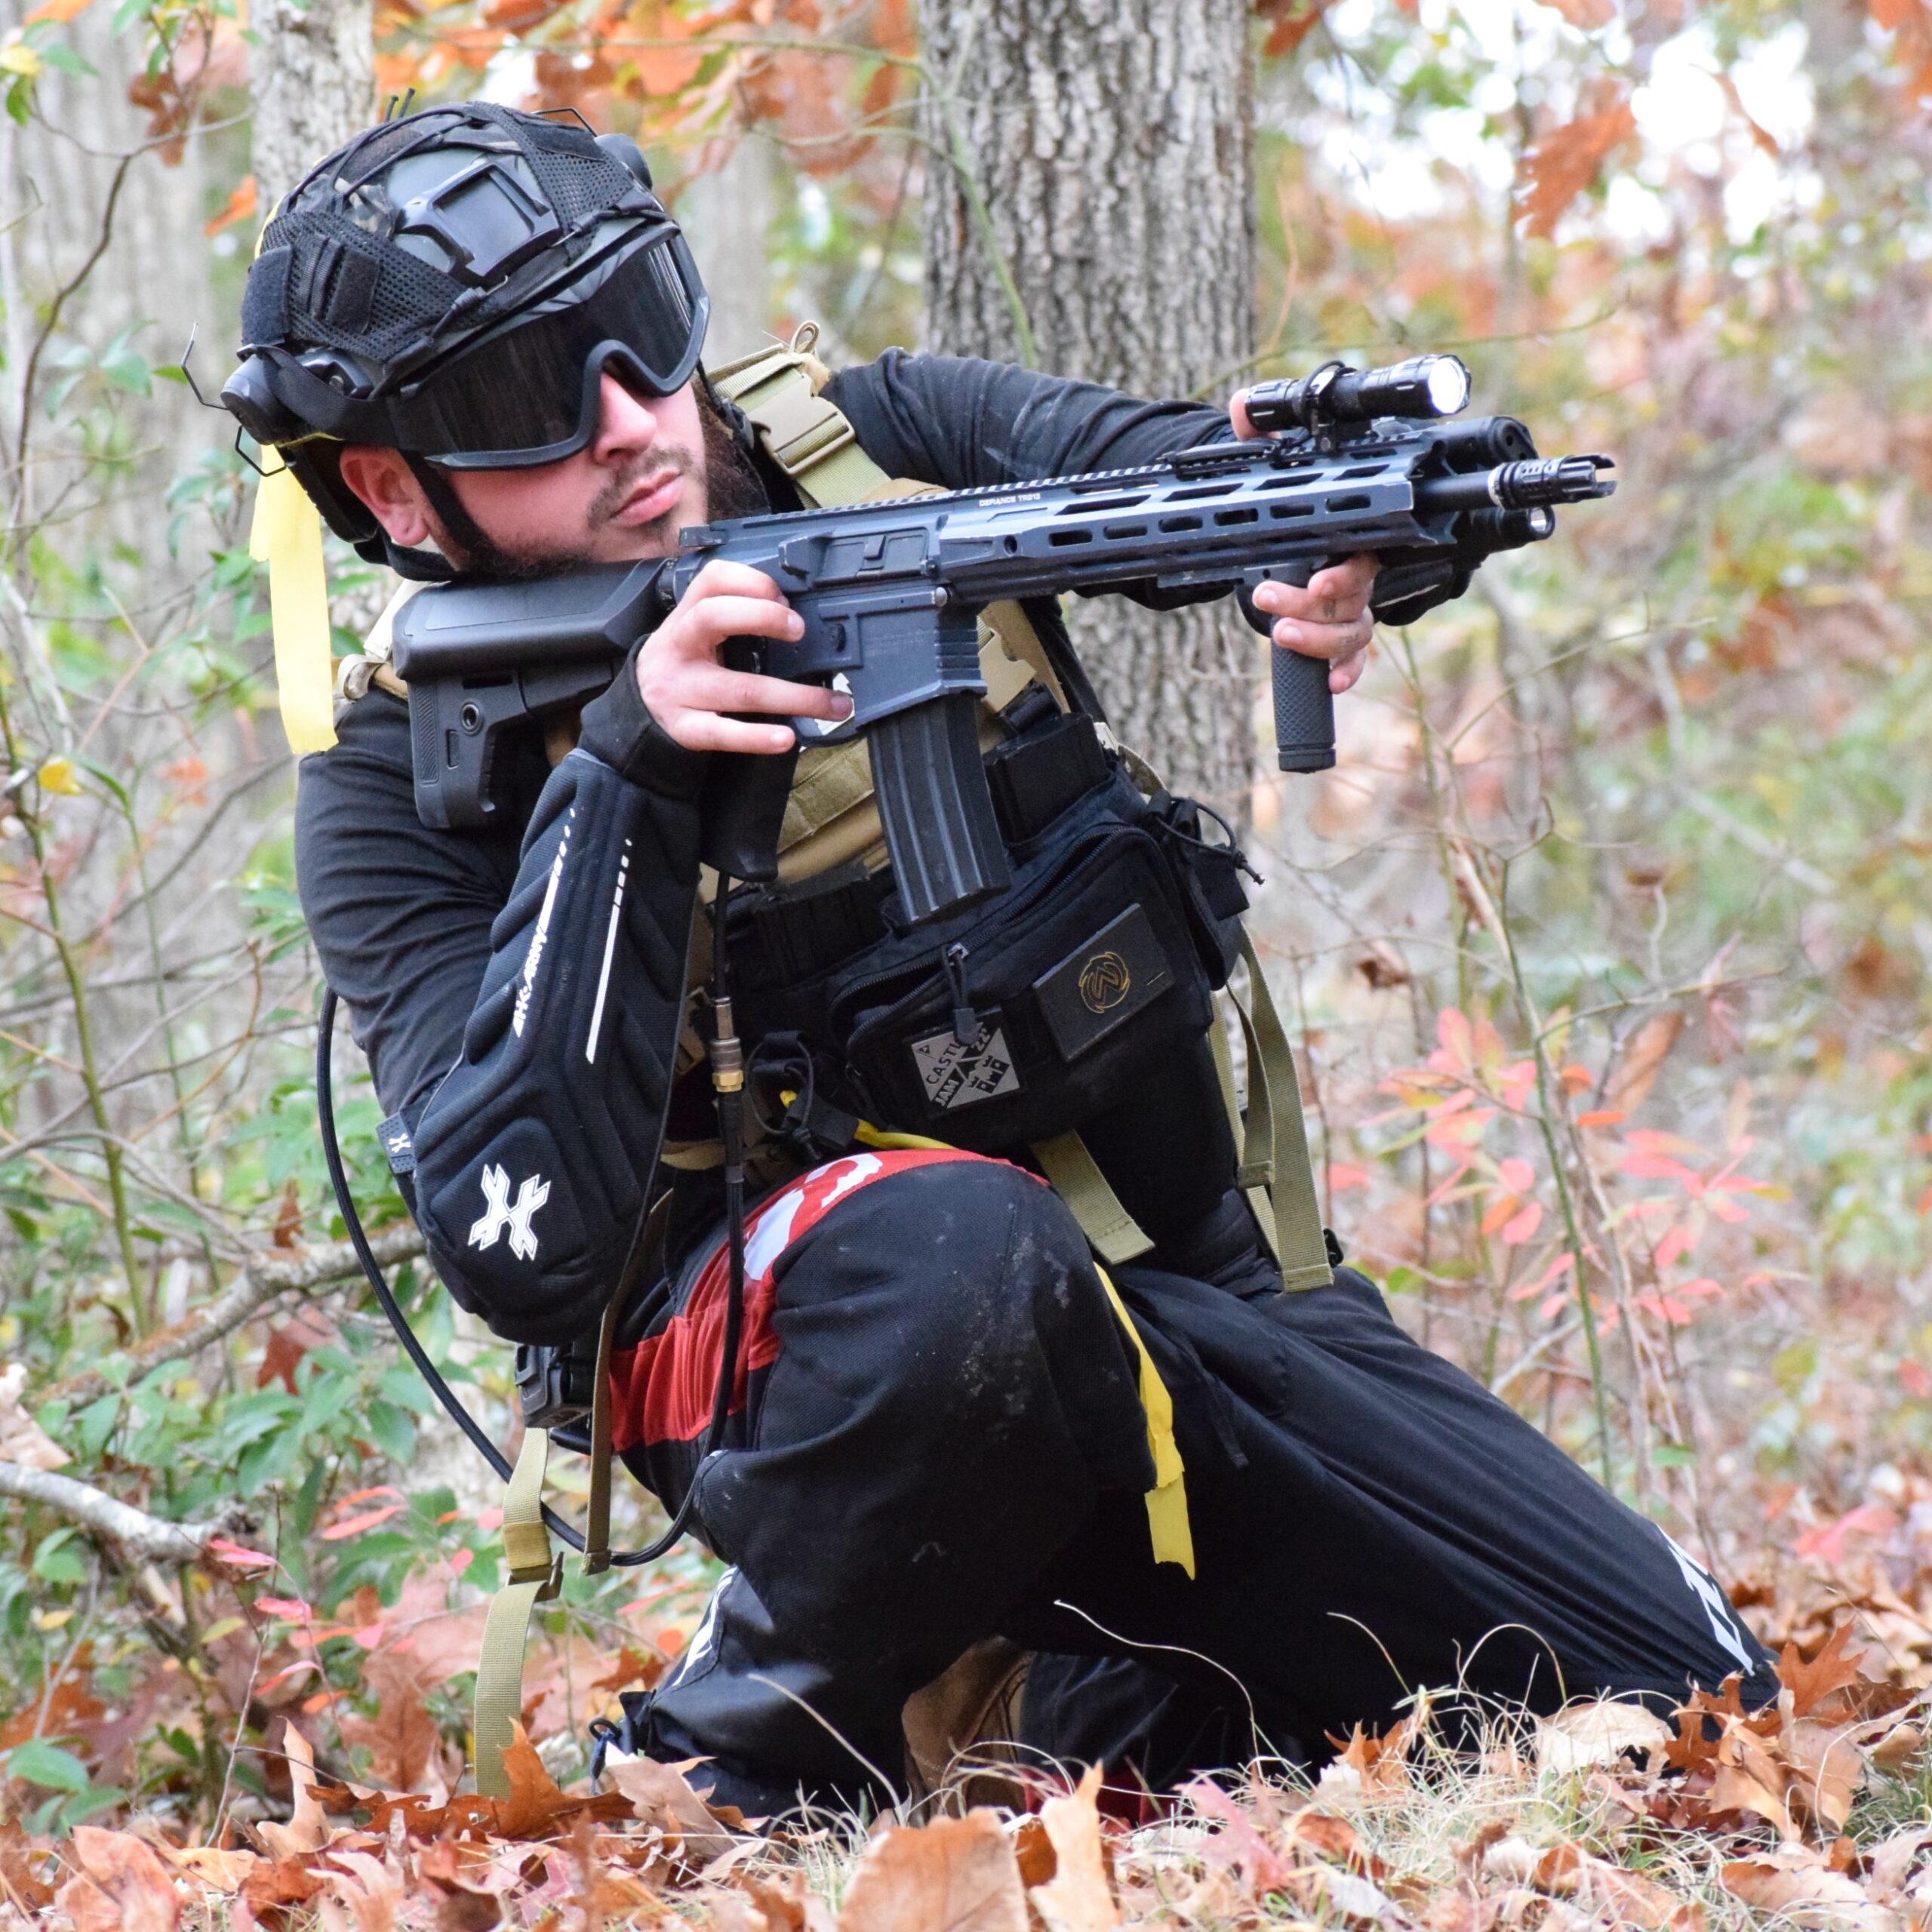 How does a paintball mask work in airsoft? - Gunfire